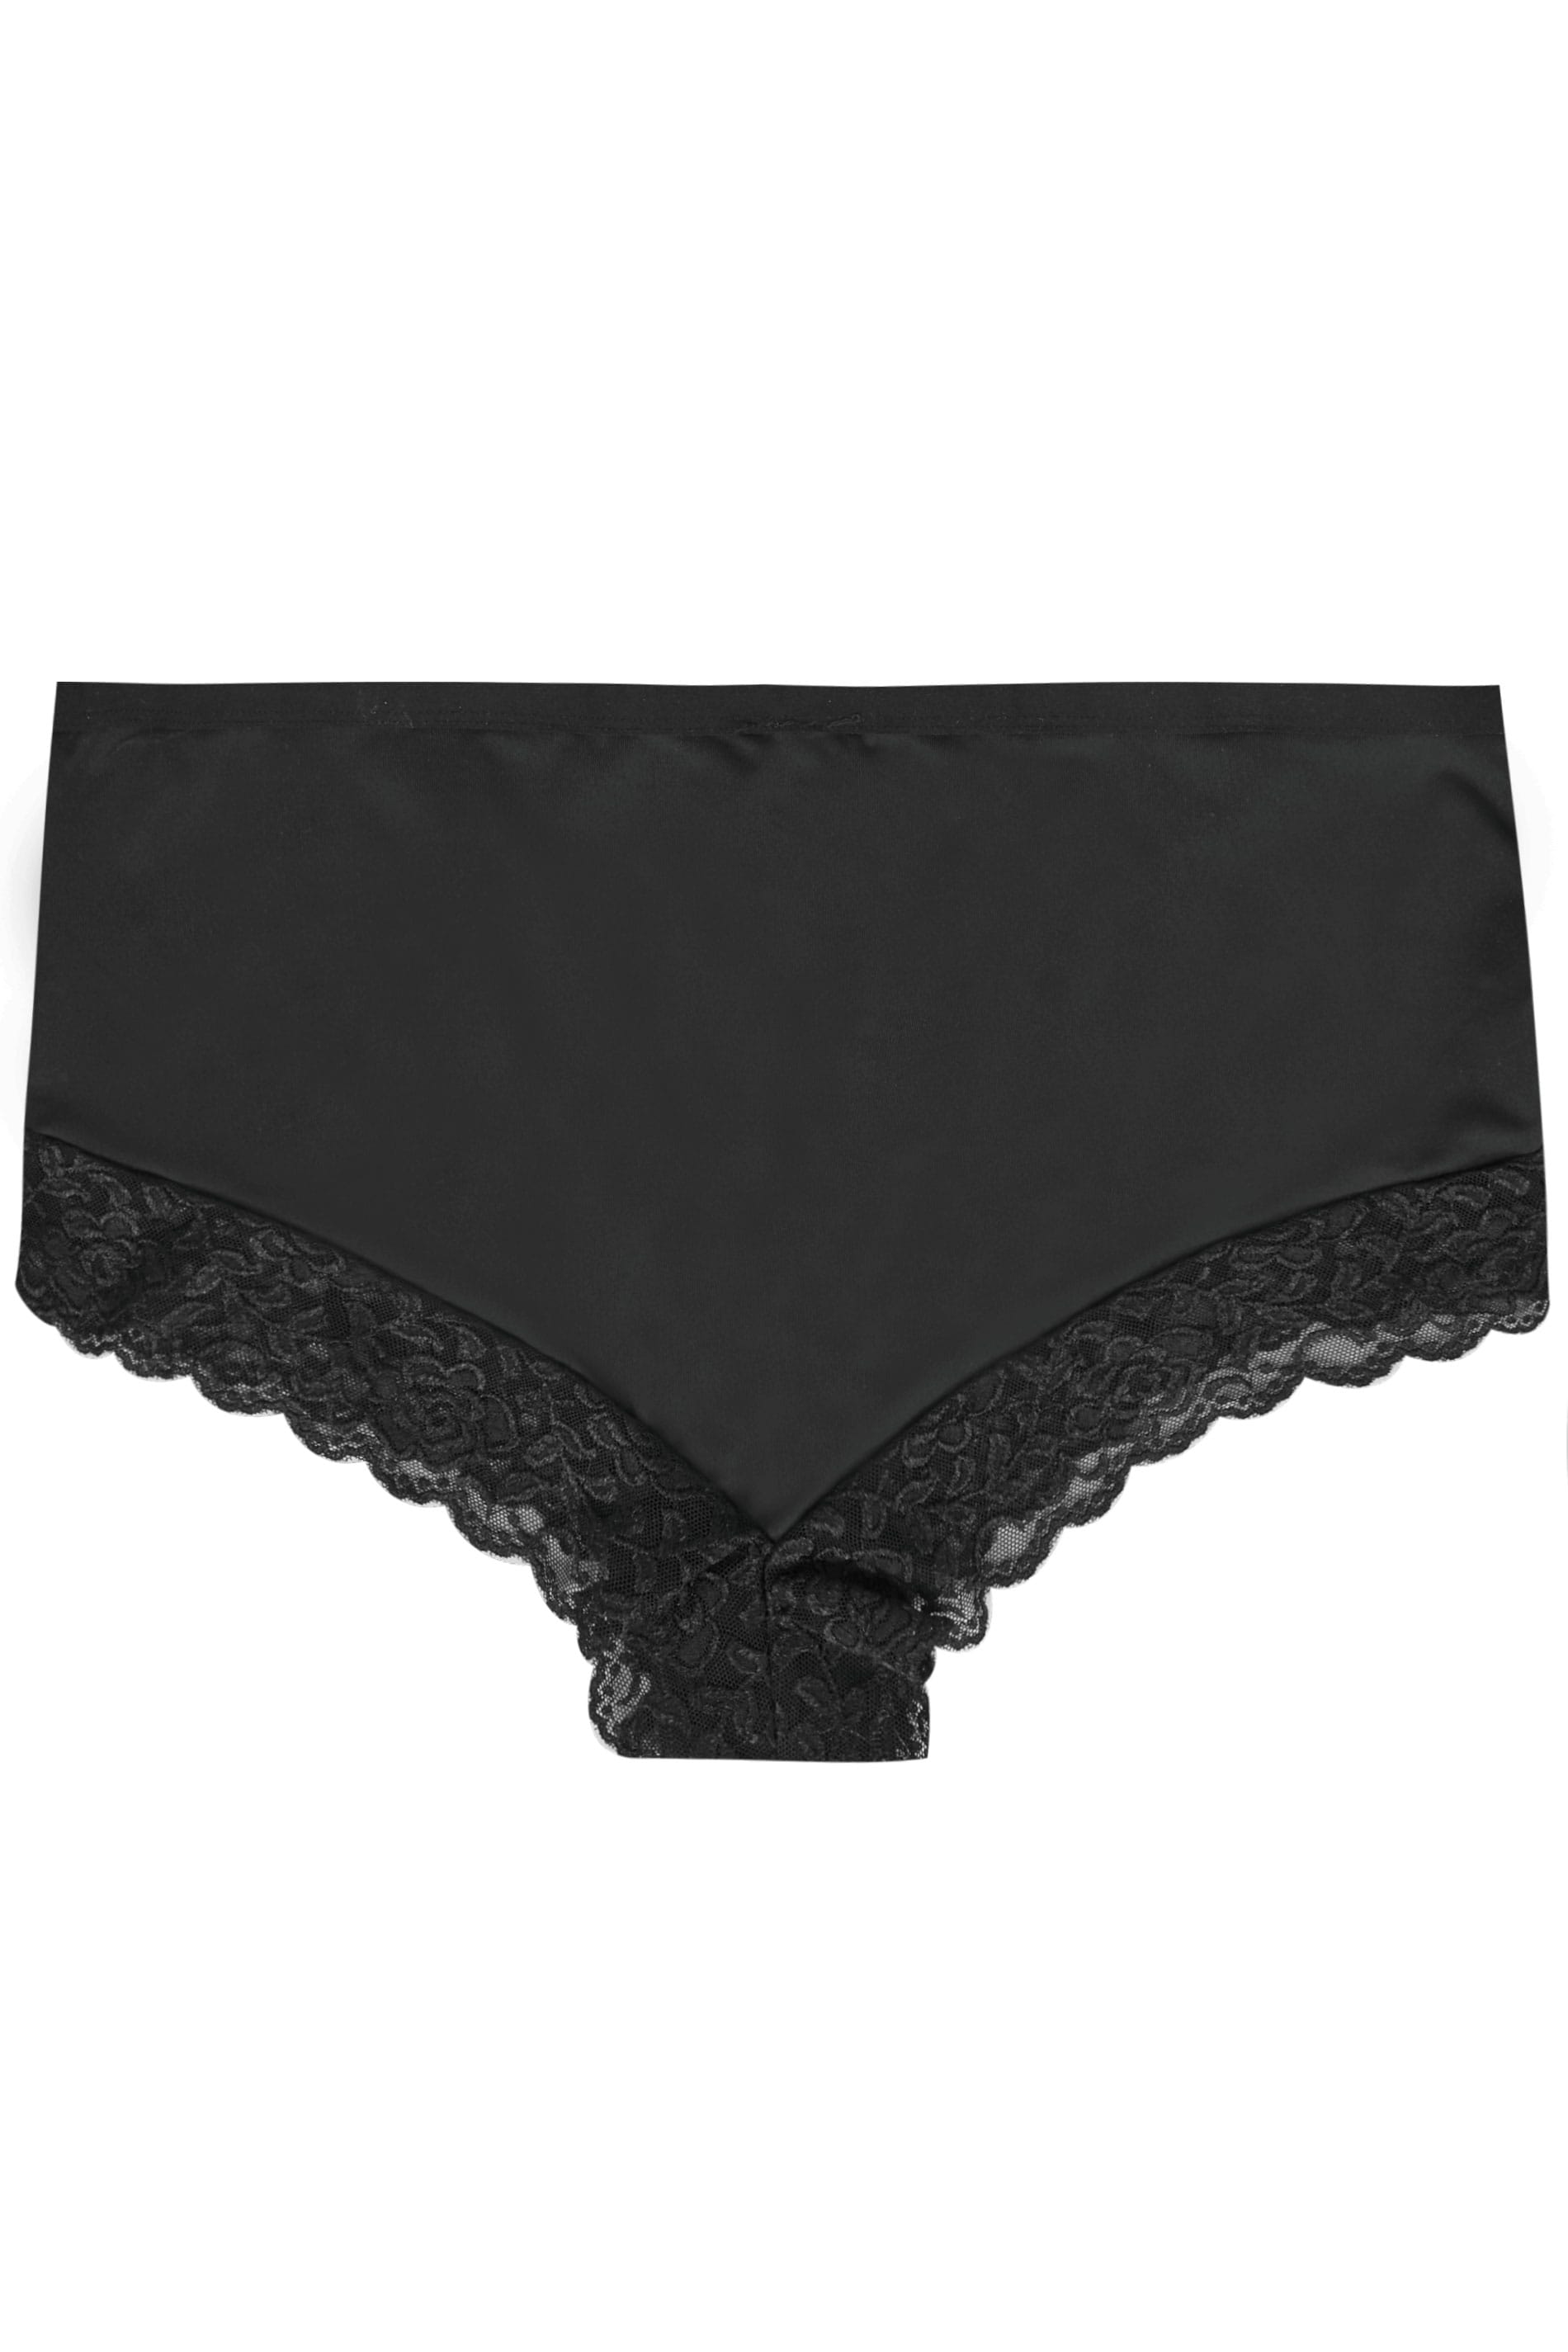 Plus Size Black Lace Trim High Leg Knickers | Yours Clothing 3